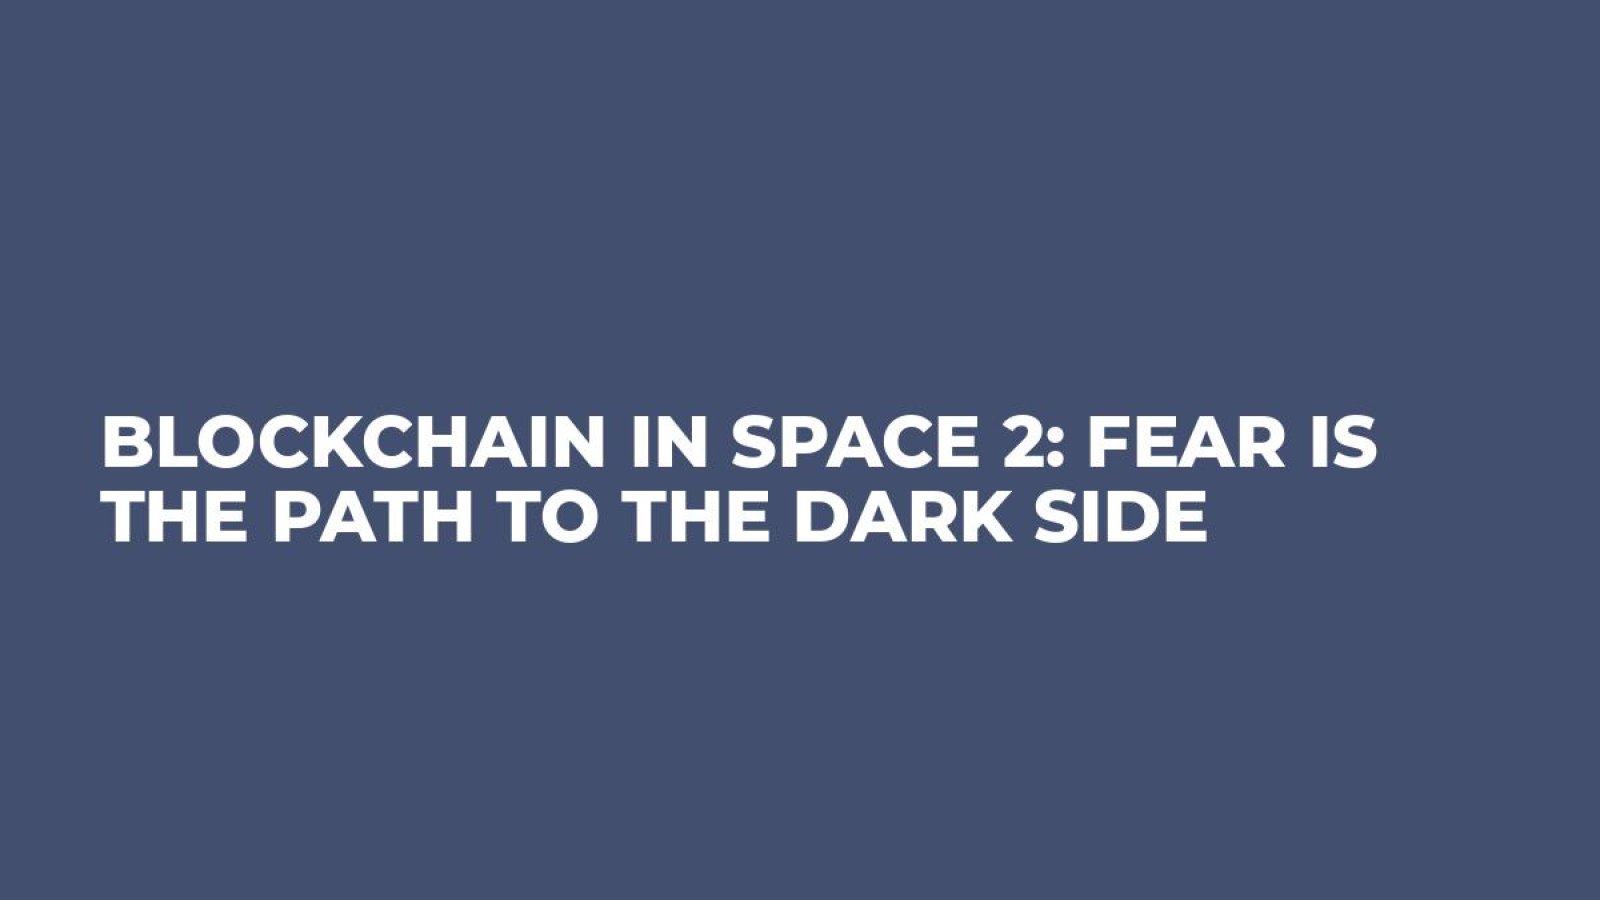 Blockchain in Space 2: Fear is the Path to the Dark Side